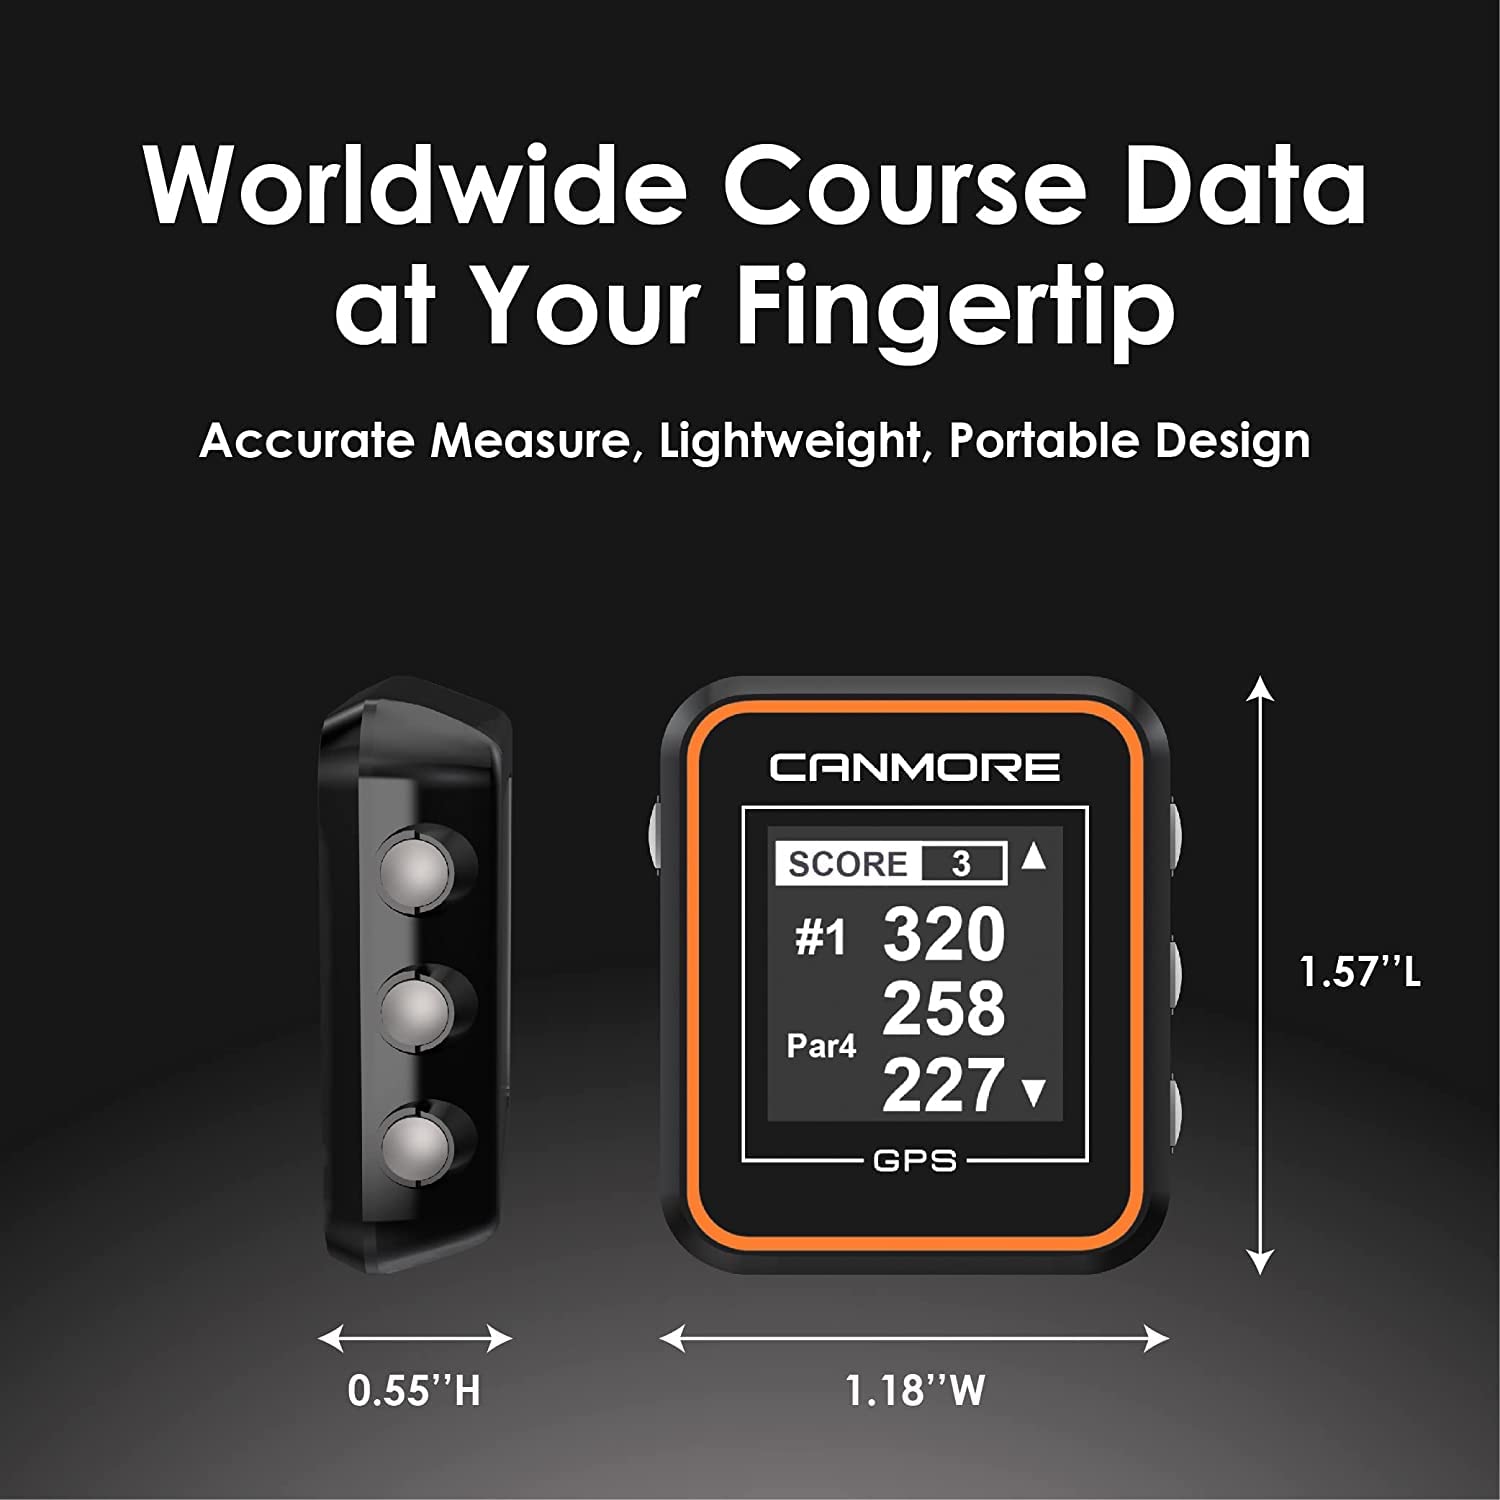 CANMORE H300 Handheld GPS Golf Device, Shot Distance Yardage Measuring, 40000+ Free Worldwide Preloaded Courses, Lightweight Golf Accessory for Golfers, Powerful Magnetic Clip for Golf Cart, Orange